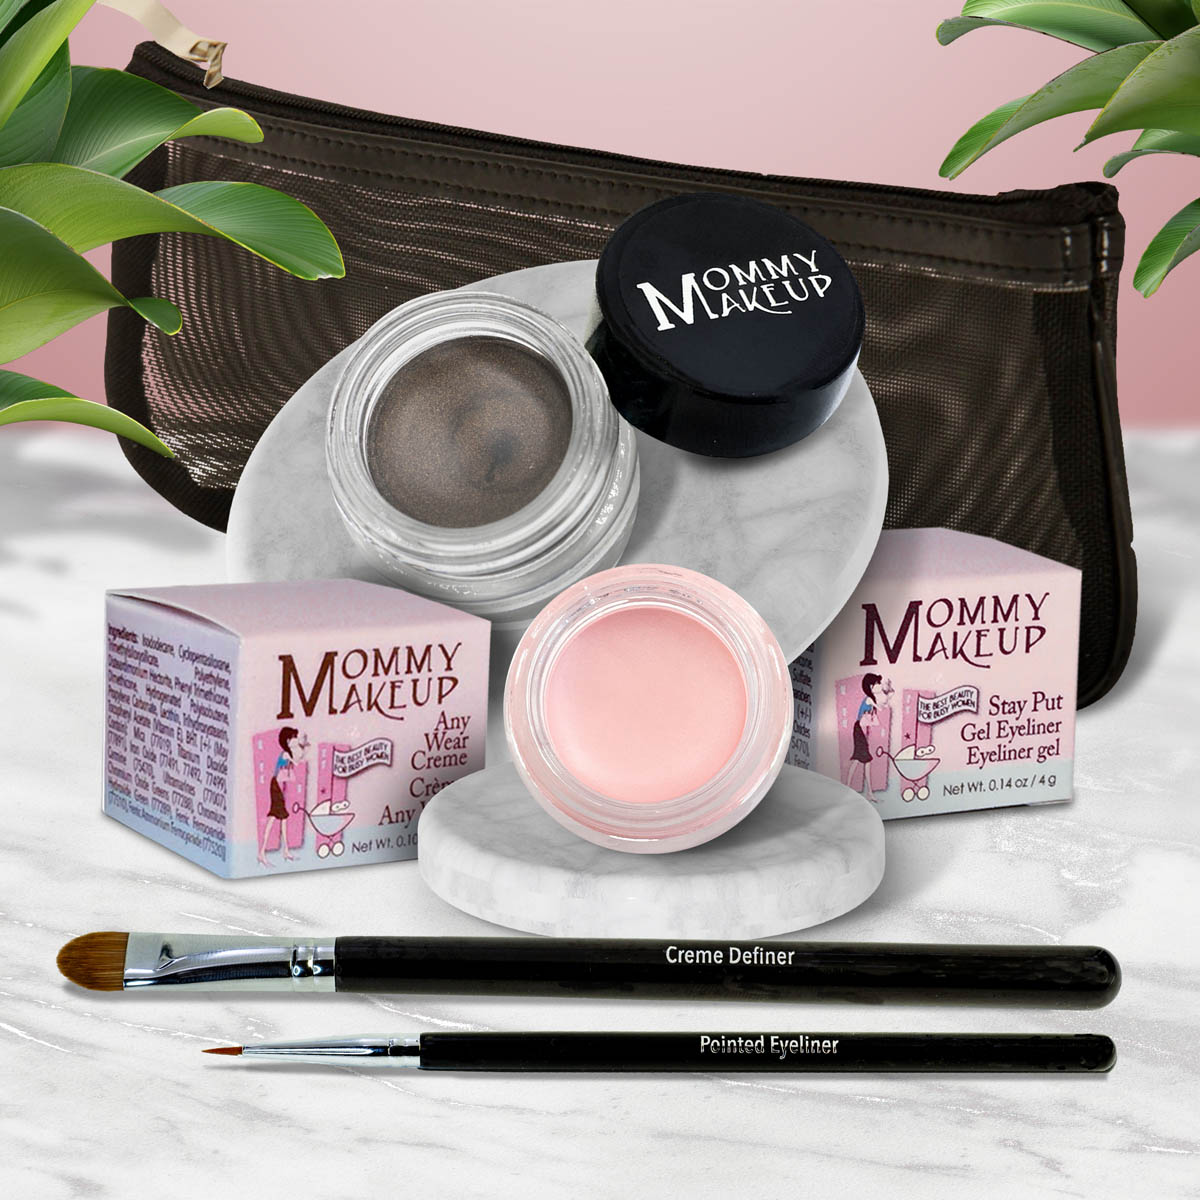 5 piece waterproof eye makeup set. Eyeliner, Eye shadow, brushes. Allergy tested, cruelty free. Made in USA. Cameo - a light nude pink and Mischievous - Black with green and gold flecks